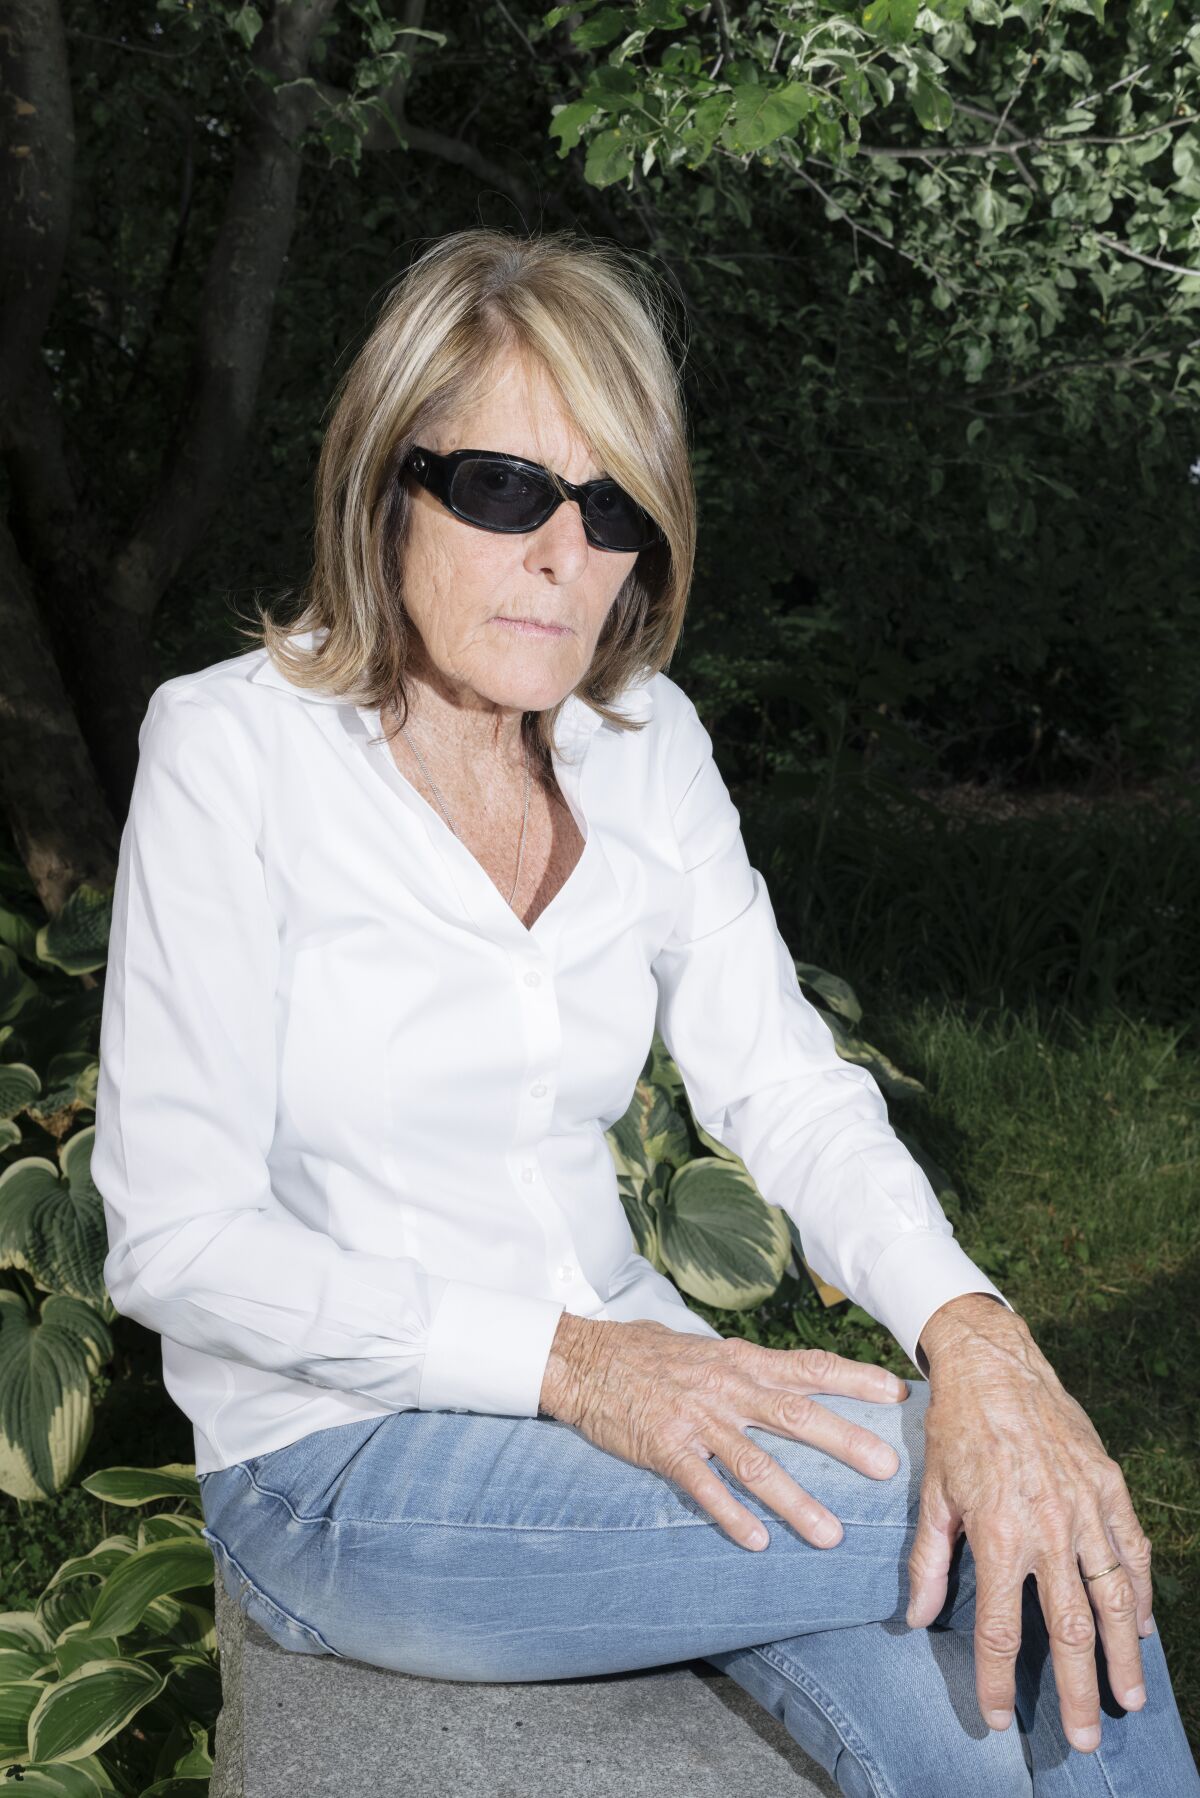 A woman wearing sunglasses sits on a rock with her legs crossed.